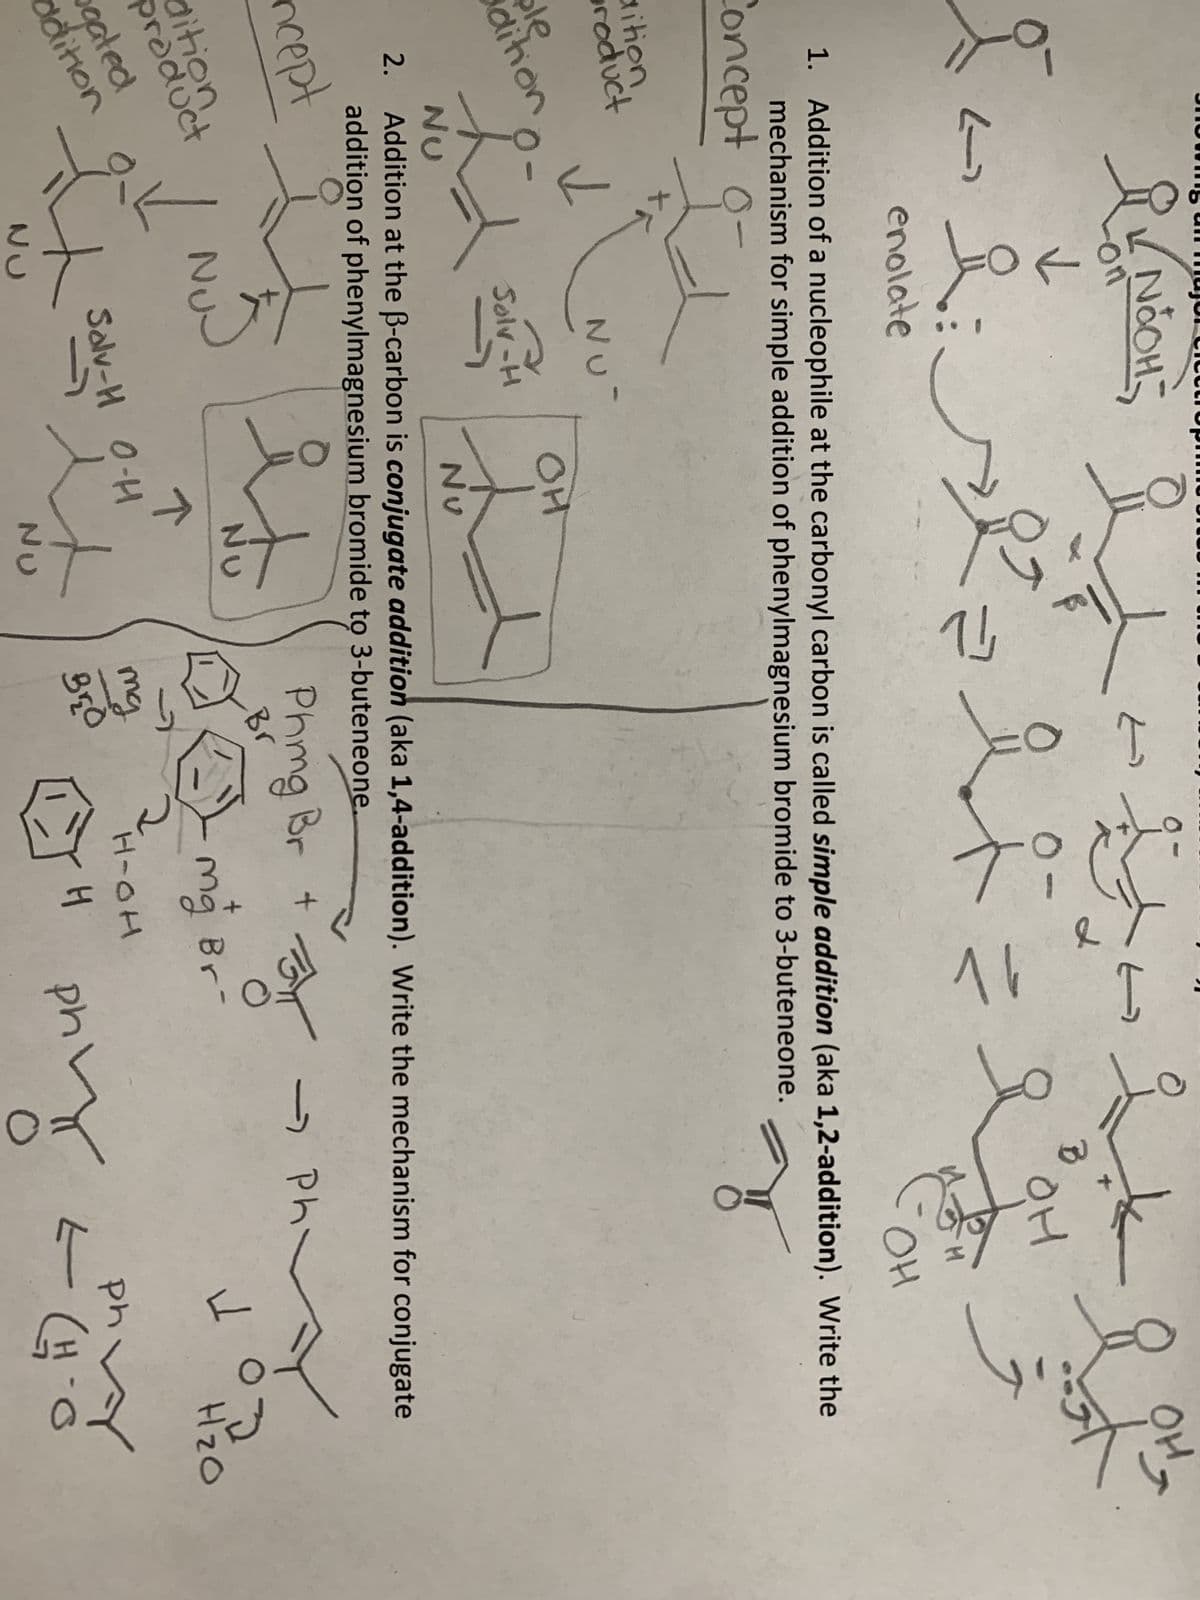 I
dition
product
ble
dition
Як ибон-
on
دے
dition
product
gated
ddition
✓
✓
요.
요
liselt
O
NU
Solv-H
NU
NU
enolate
1. Addition of a nucleophile at the carbonyl carbon is called simple addition (aka 1,2-addition). Write the
mechanism for simple addition of phenylmagnesium bromide to 3-buteneone.
Concept -
OH
isto
NU
دے
个
Salv-H
Solv-H O-H
F
it
NU
0-
NU
Nu
2. Addition at the ß-carbon is conjugate addition (aka 1,4-addition). Write the mechanism for conjugate
addition of phenylmagnesium bromide to 3-buteneone.
ncept
mg
Bro
Phmg Br +
Br
t
16
H-OH
H
B
BYT
Mg Br-
OH
for
phy
४
OH
- Ph
VOD
ph
=
L
H₂O
(H-O